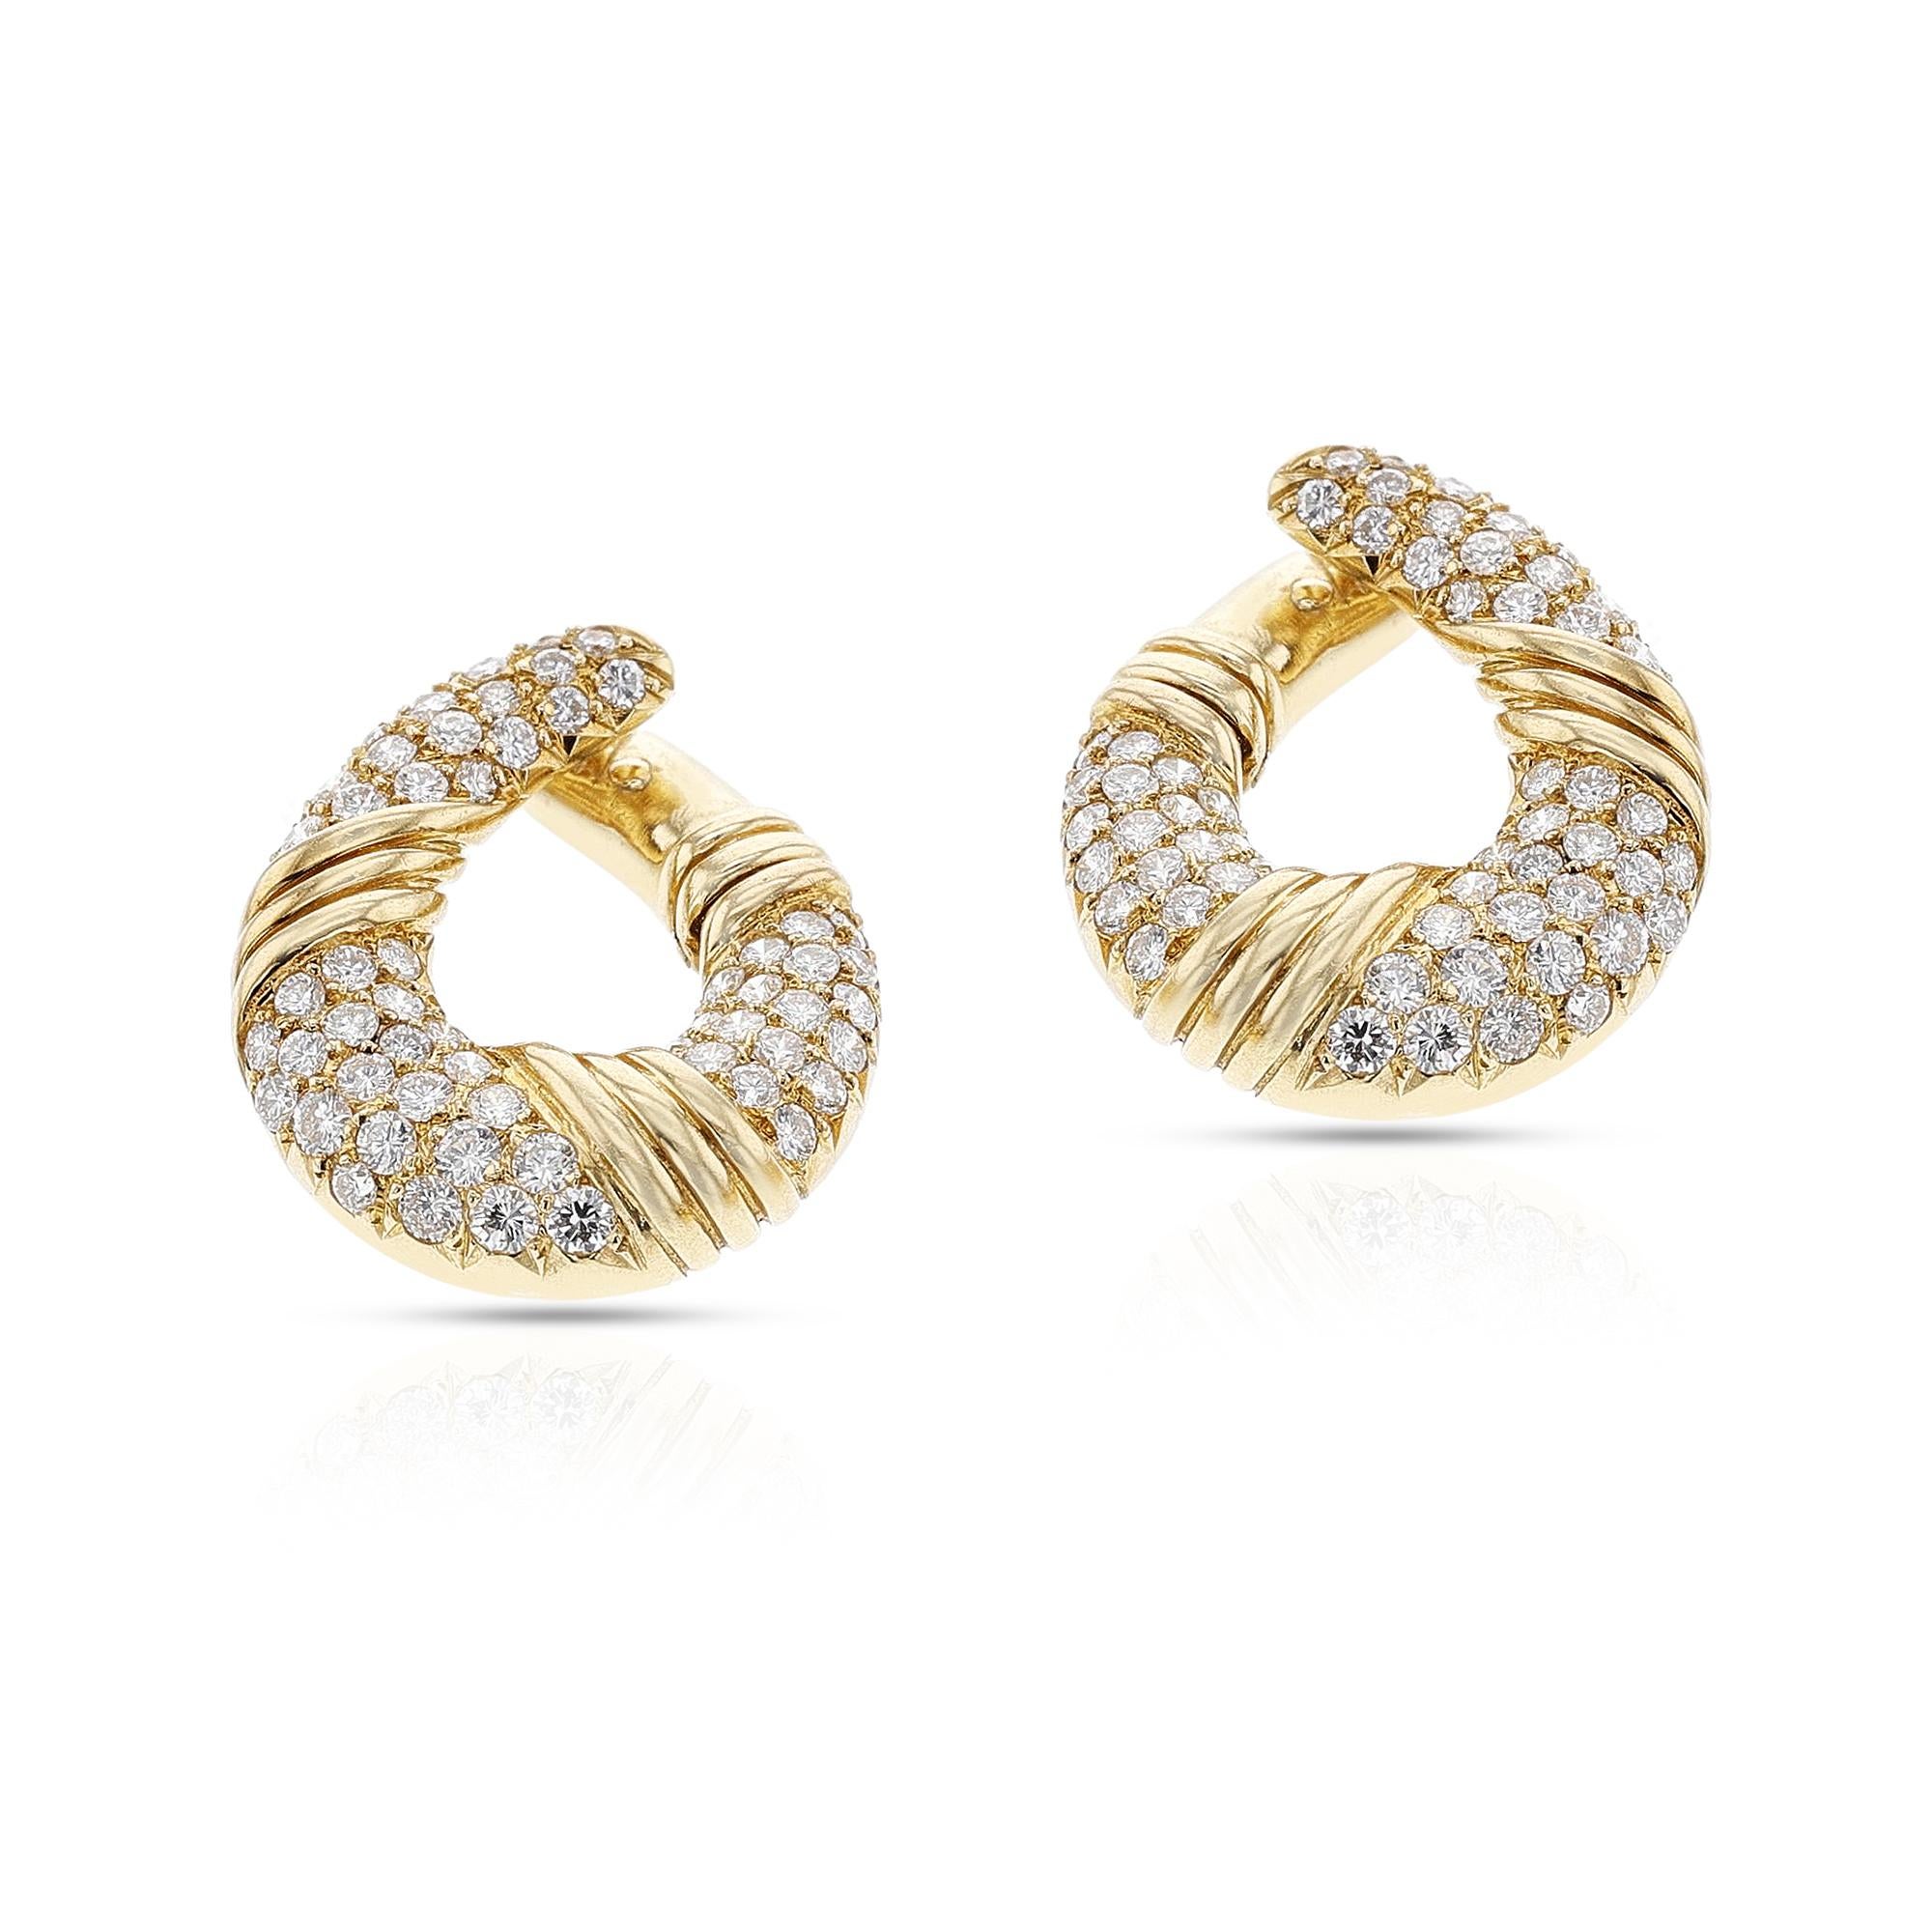 A pair of Van Cleef & Arpels Gold and Diamond Earrings made in 18k Yellow Gold. The earrings weigh 13 grams, and the dimensions are 0.90 inches x 0.64 inches. Signed and Numbered.



SKU: 1511